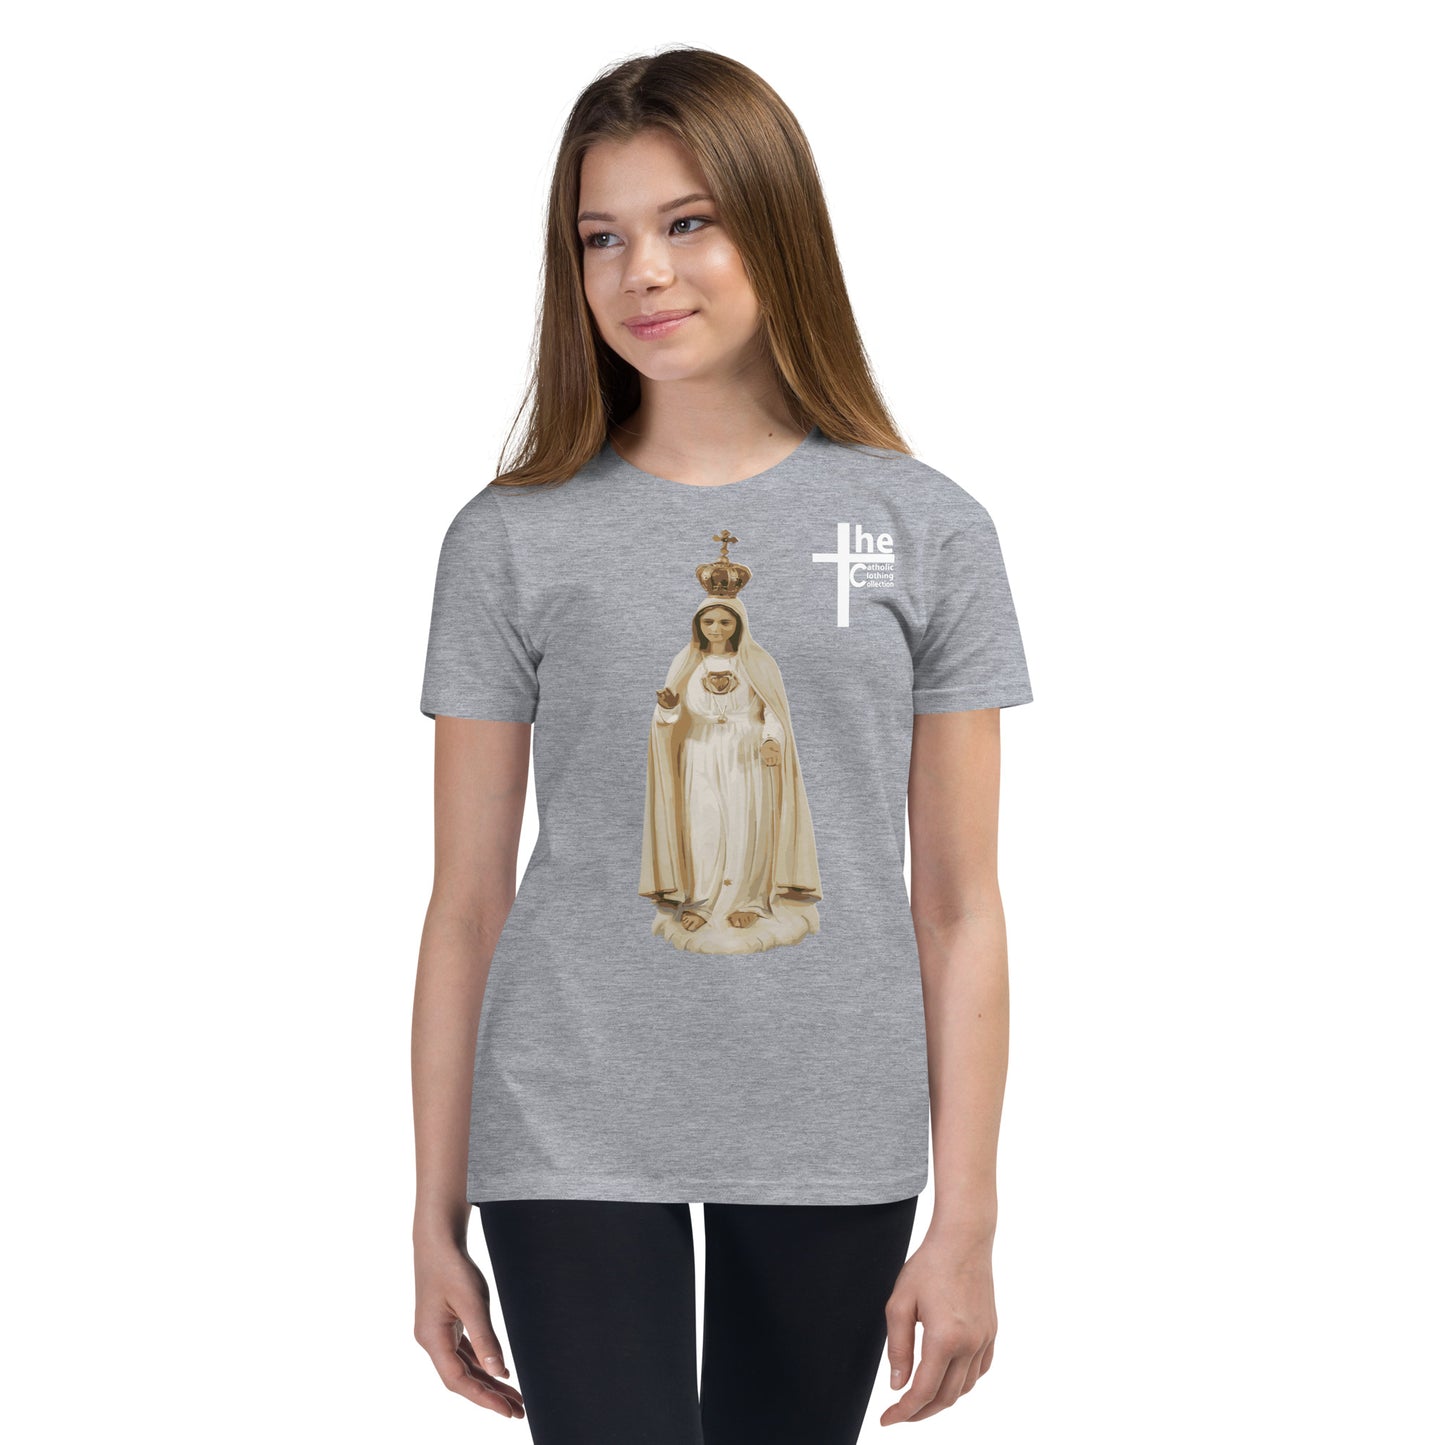 Our Lady of Fatima Children's t-Shirt